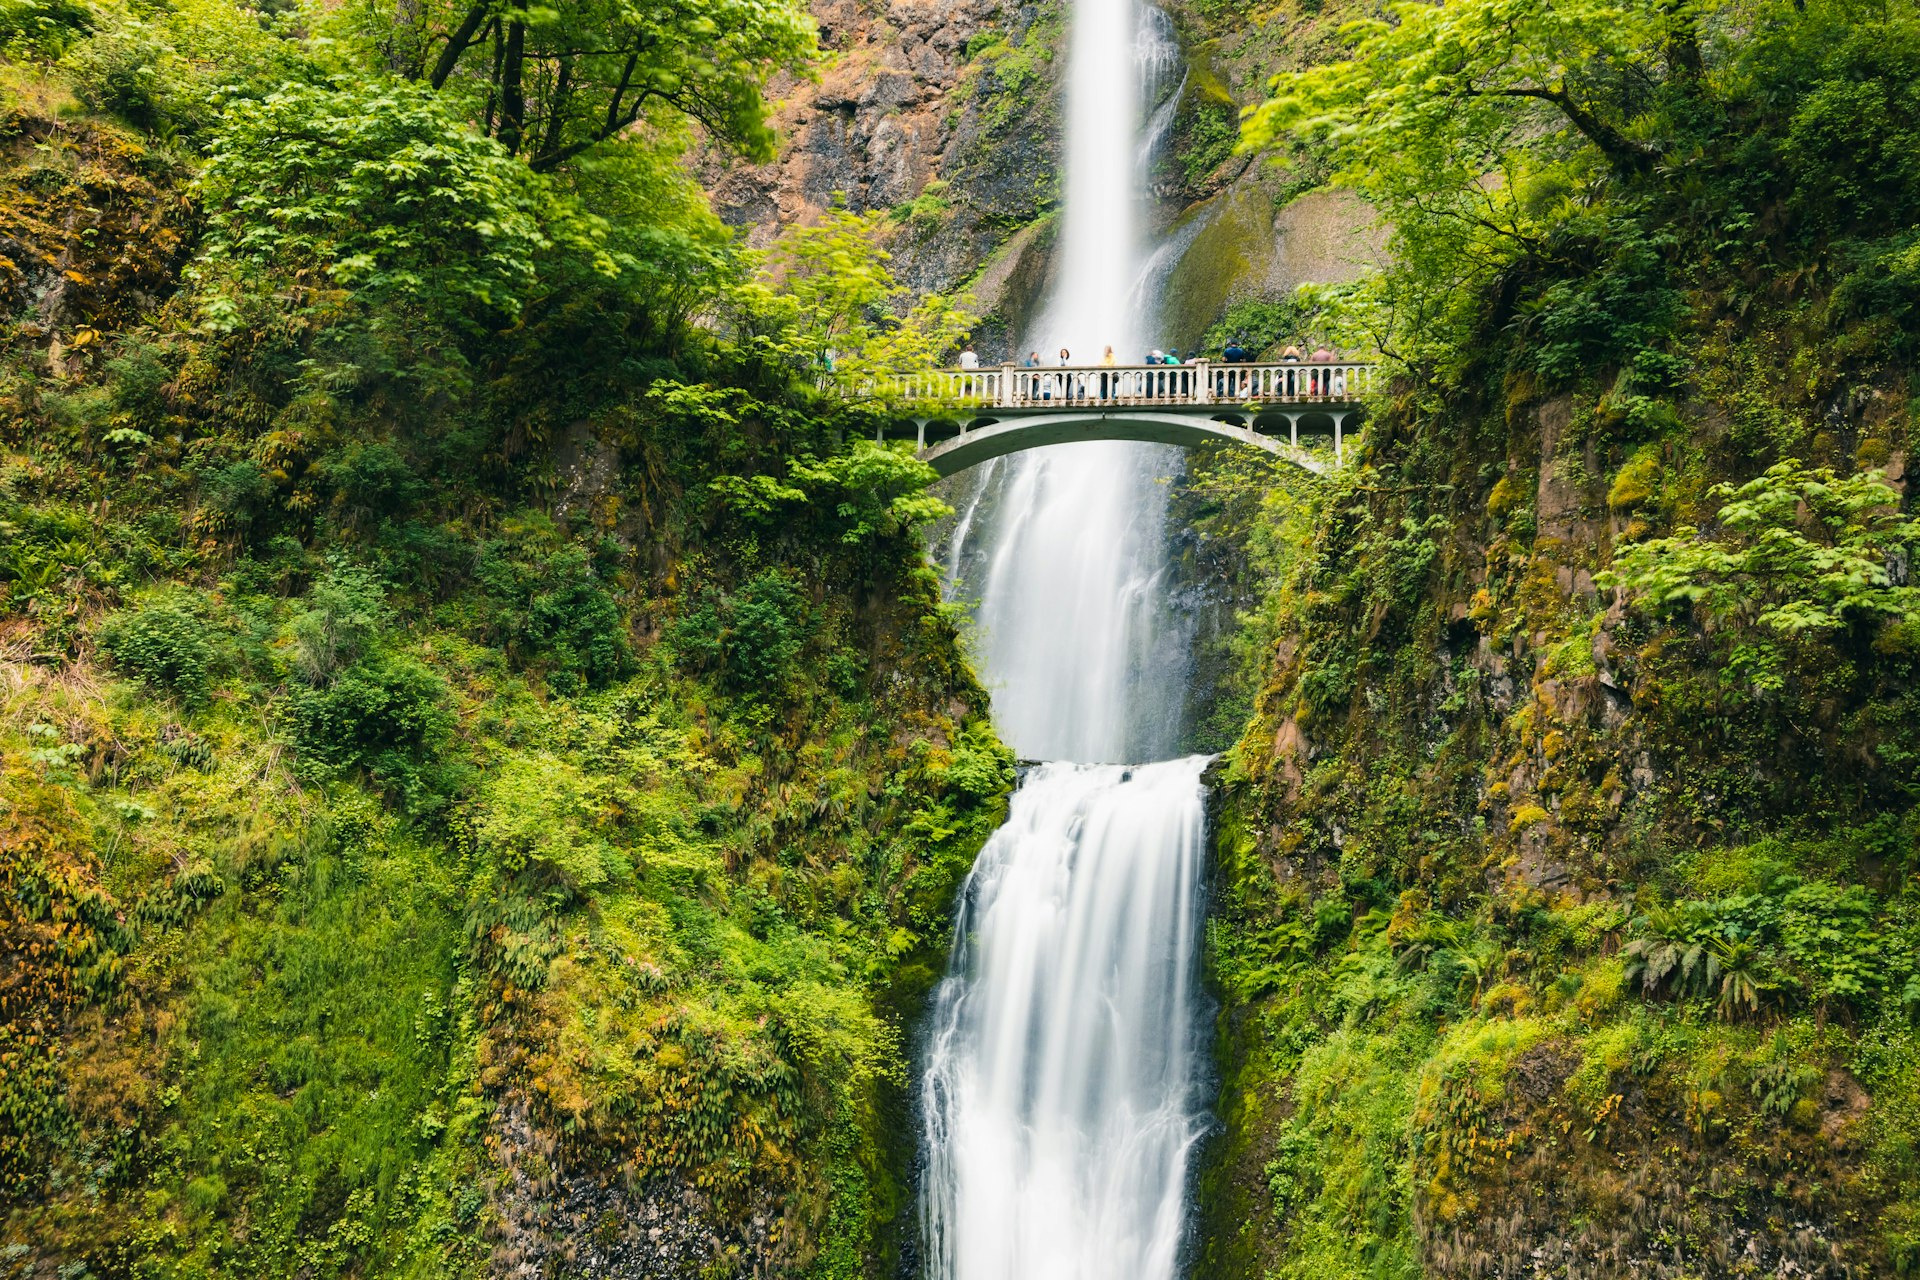 Visitors on a bridge at Multnomah Falls, surrounded by lush greenery